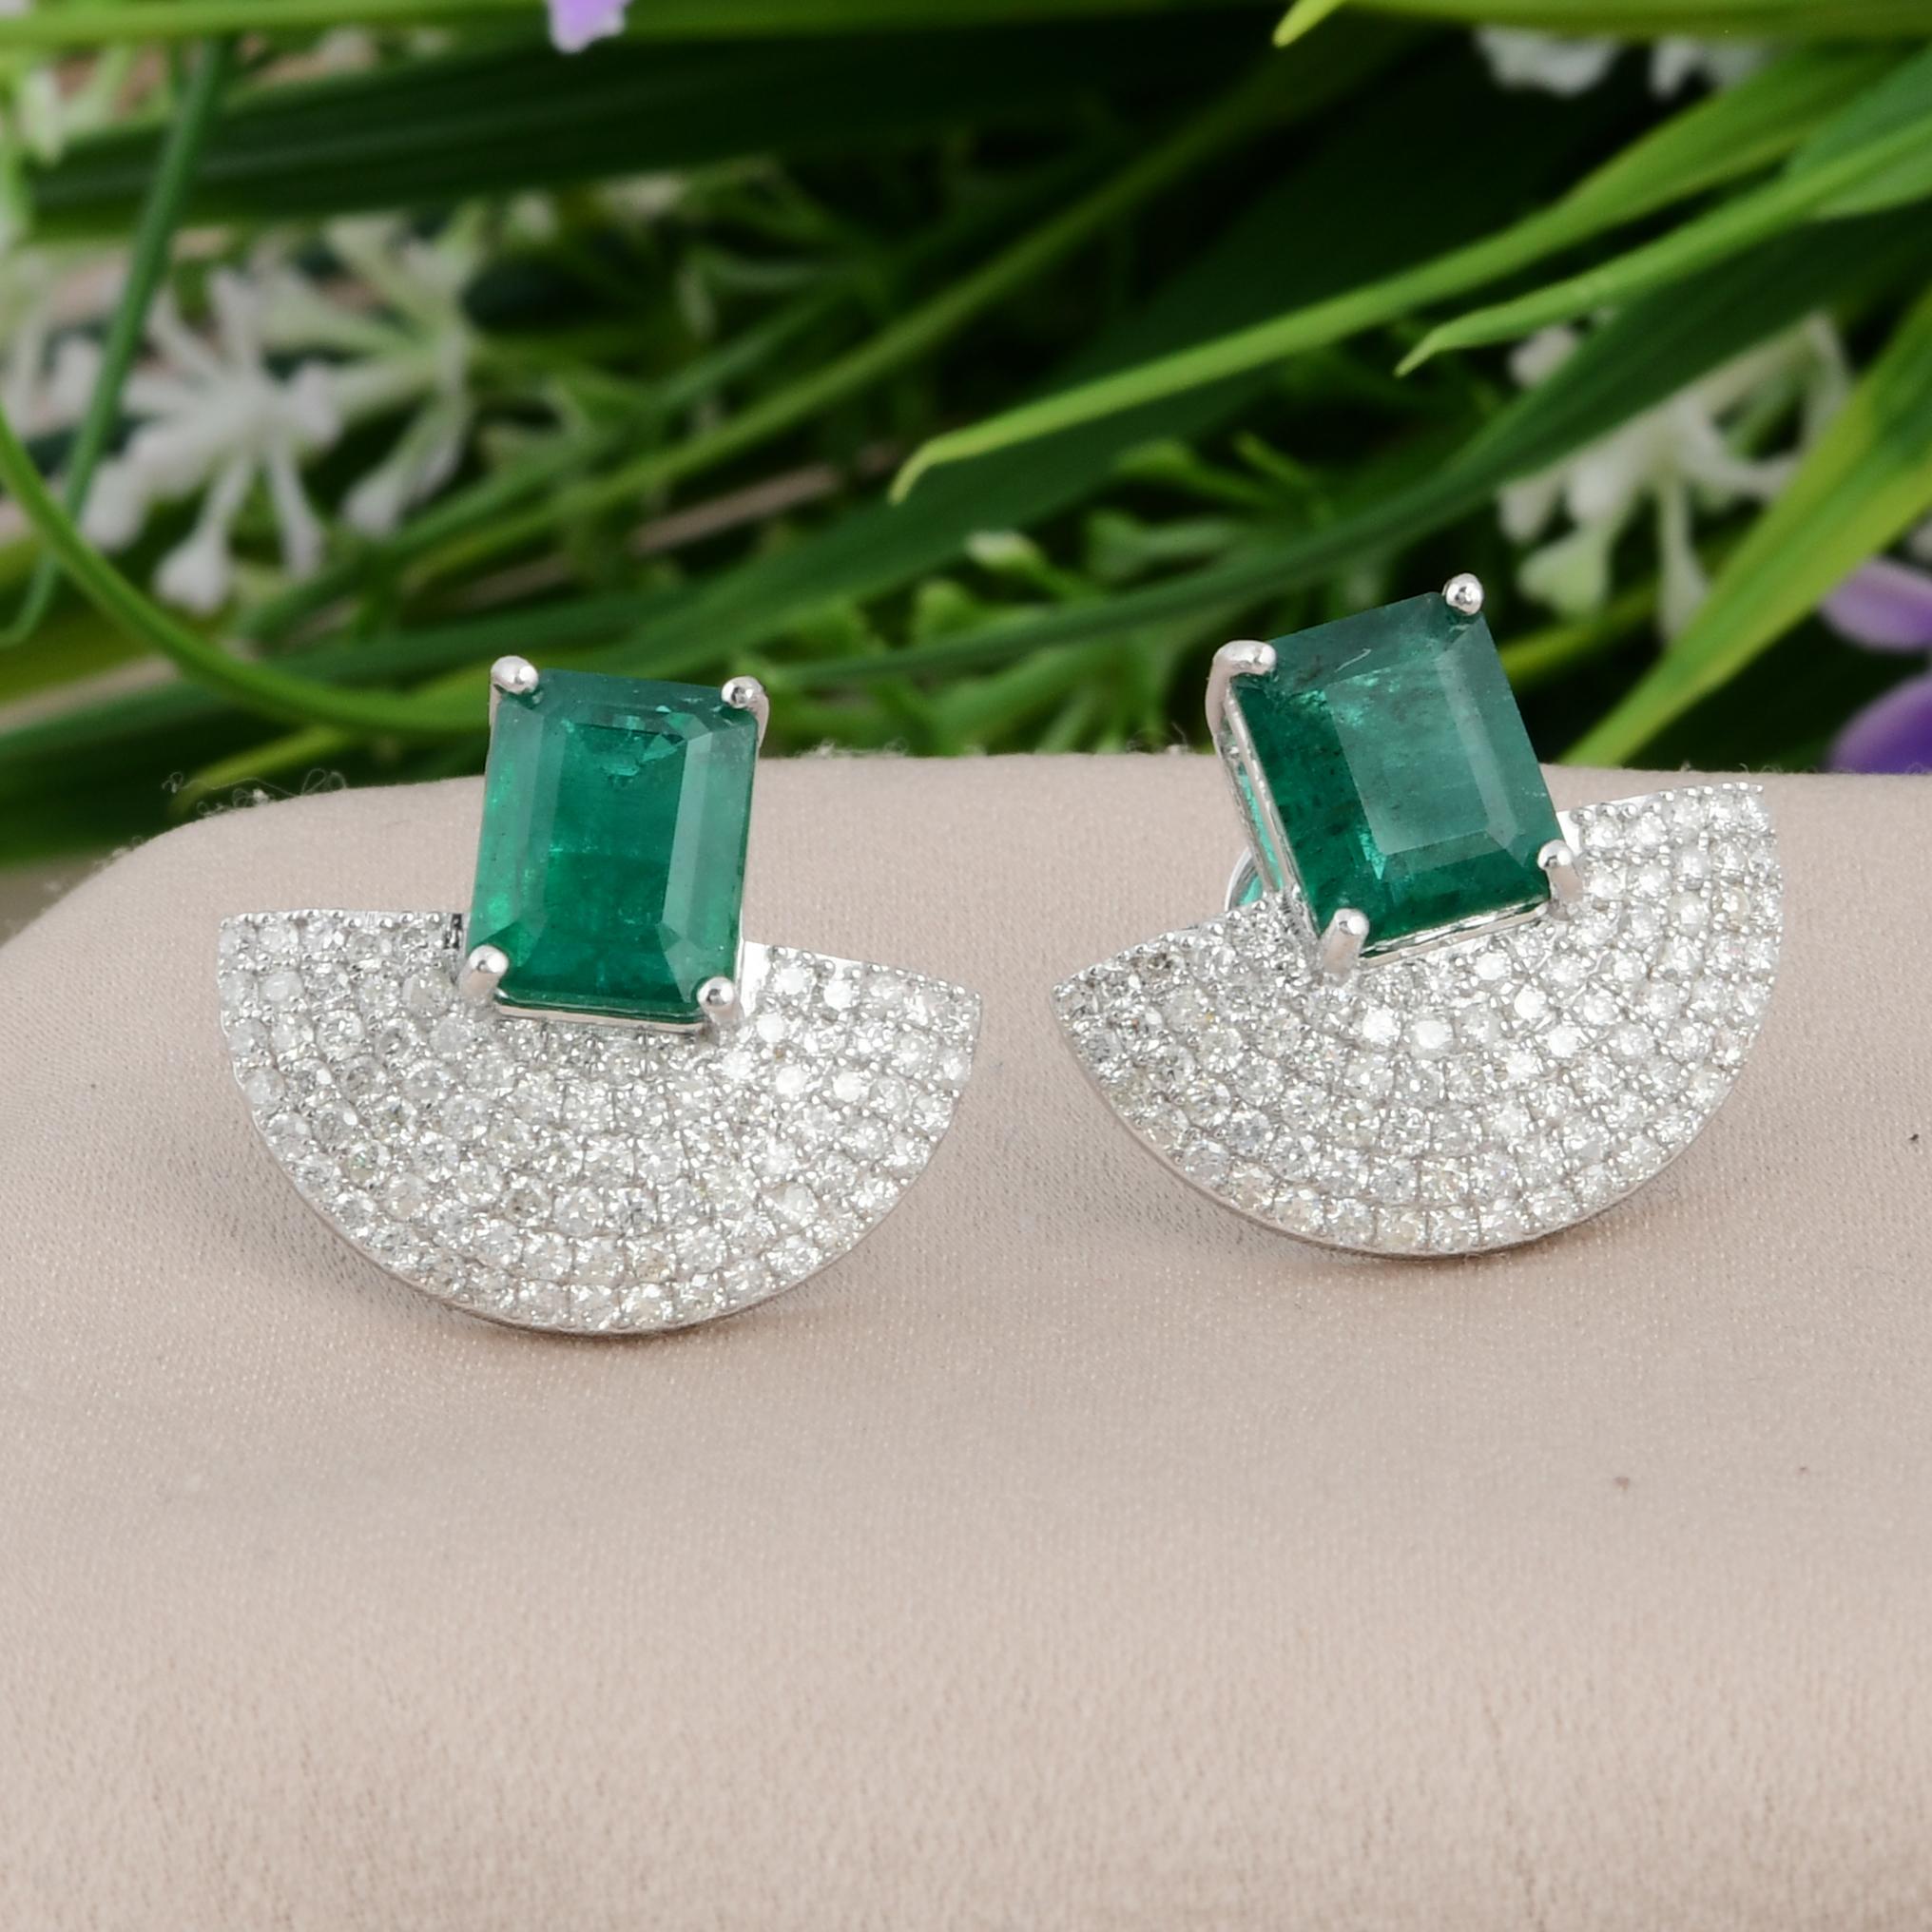 Item Code :- SEE-12790A
Gross Wt. :- 8.92 gm
18k White Gold Wt. :- 7.44 gm
Natural Diamond Wt. :- 1.12 Ct. ( AVERAGE DIAMOND CLARITY SI1-SI2 & COLOUR H-I )
Zambian Emerald Wt. :- 6.28 Ct. 
Earrings Length :- 19 mm approx.

✦